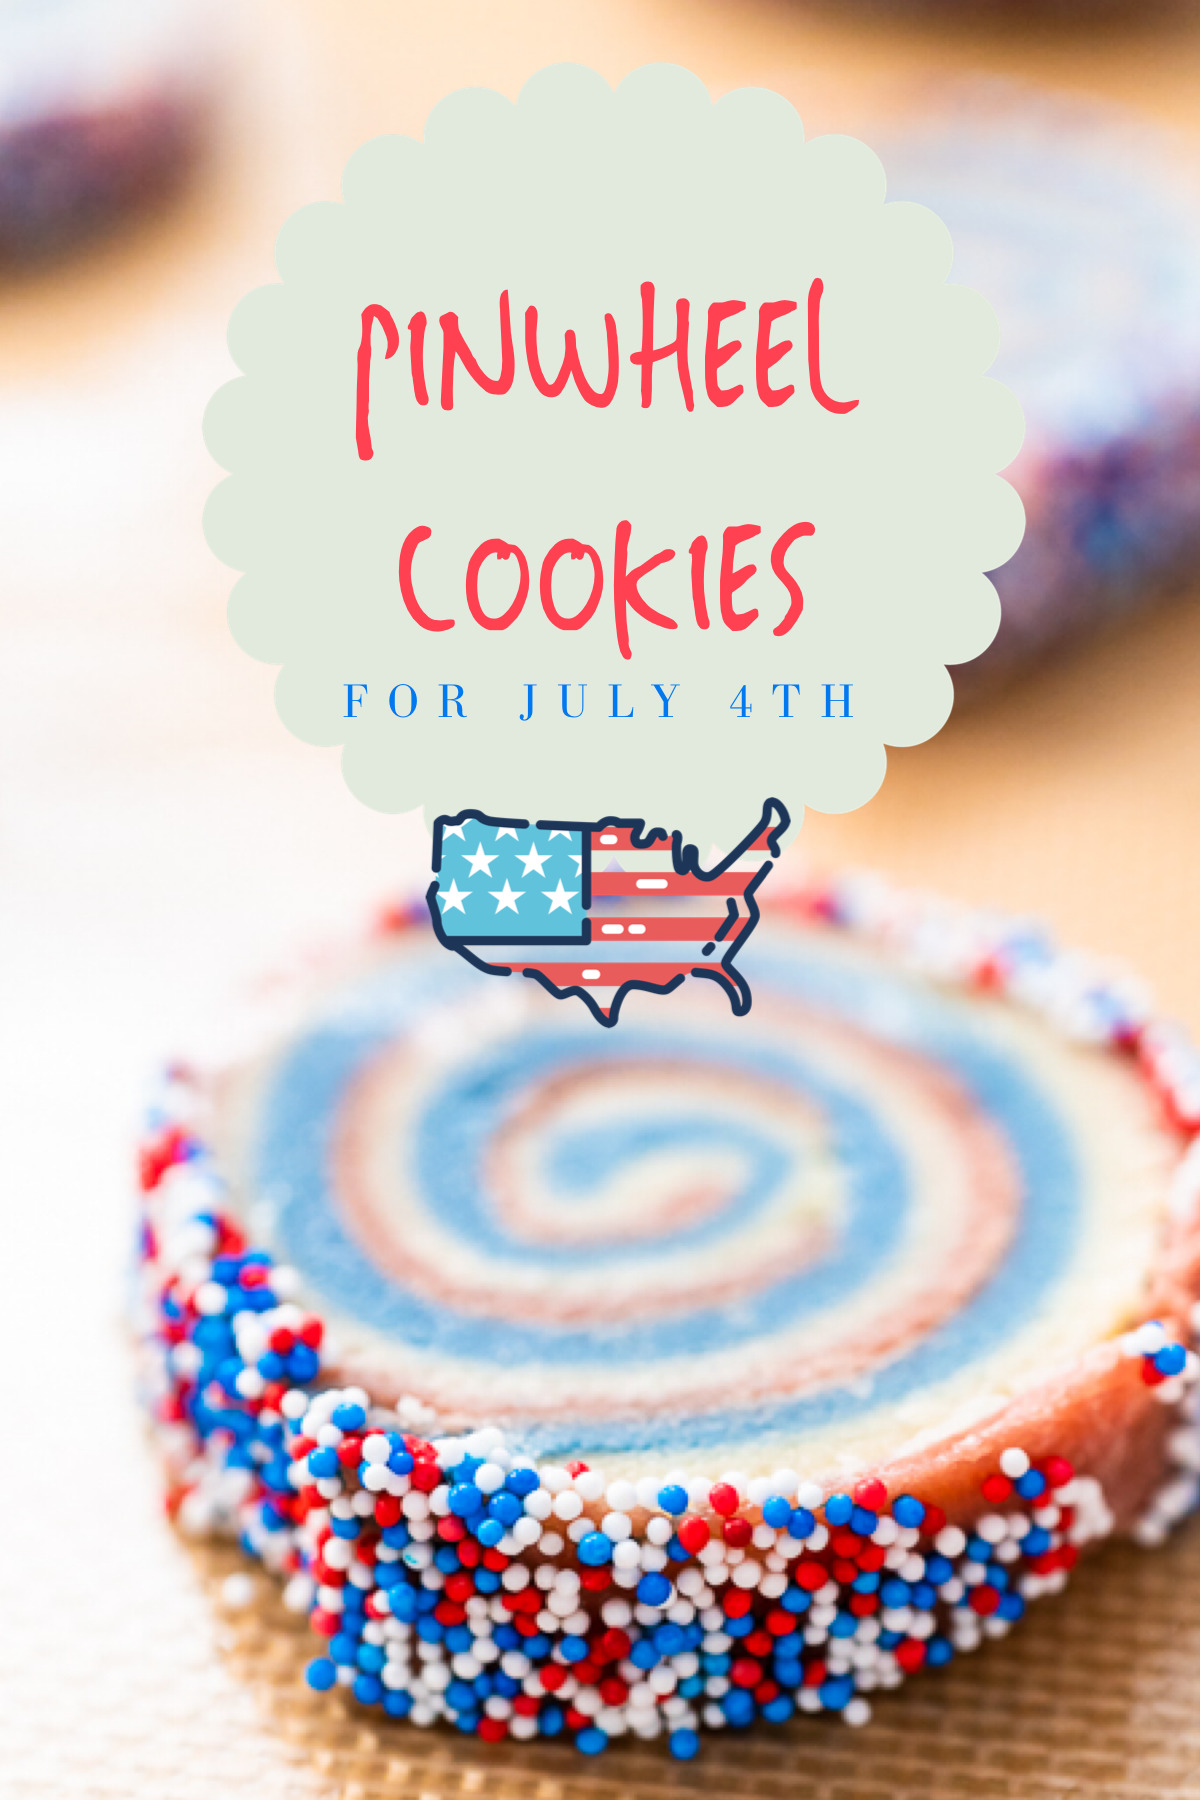 Pinwheel Cookies for the 4th of July